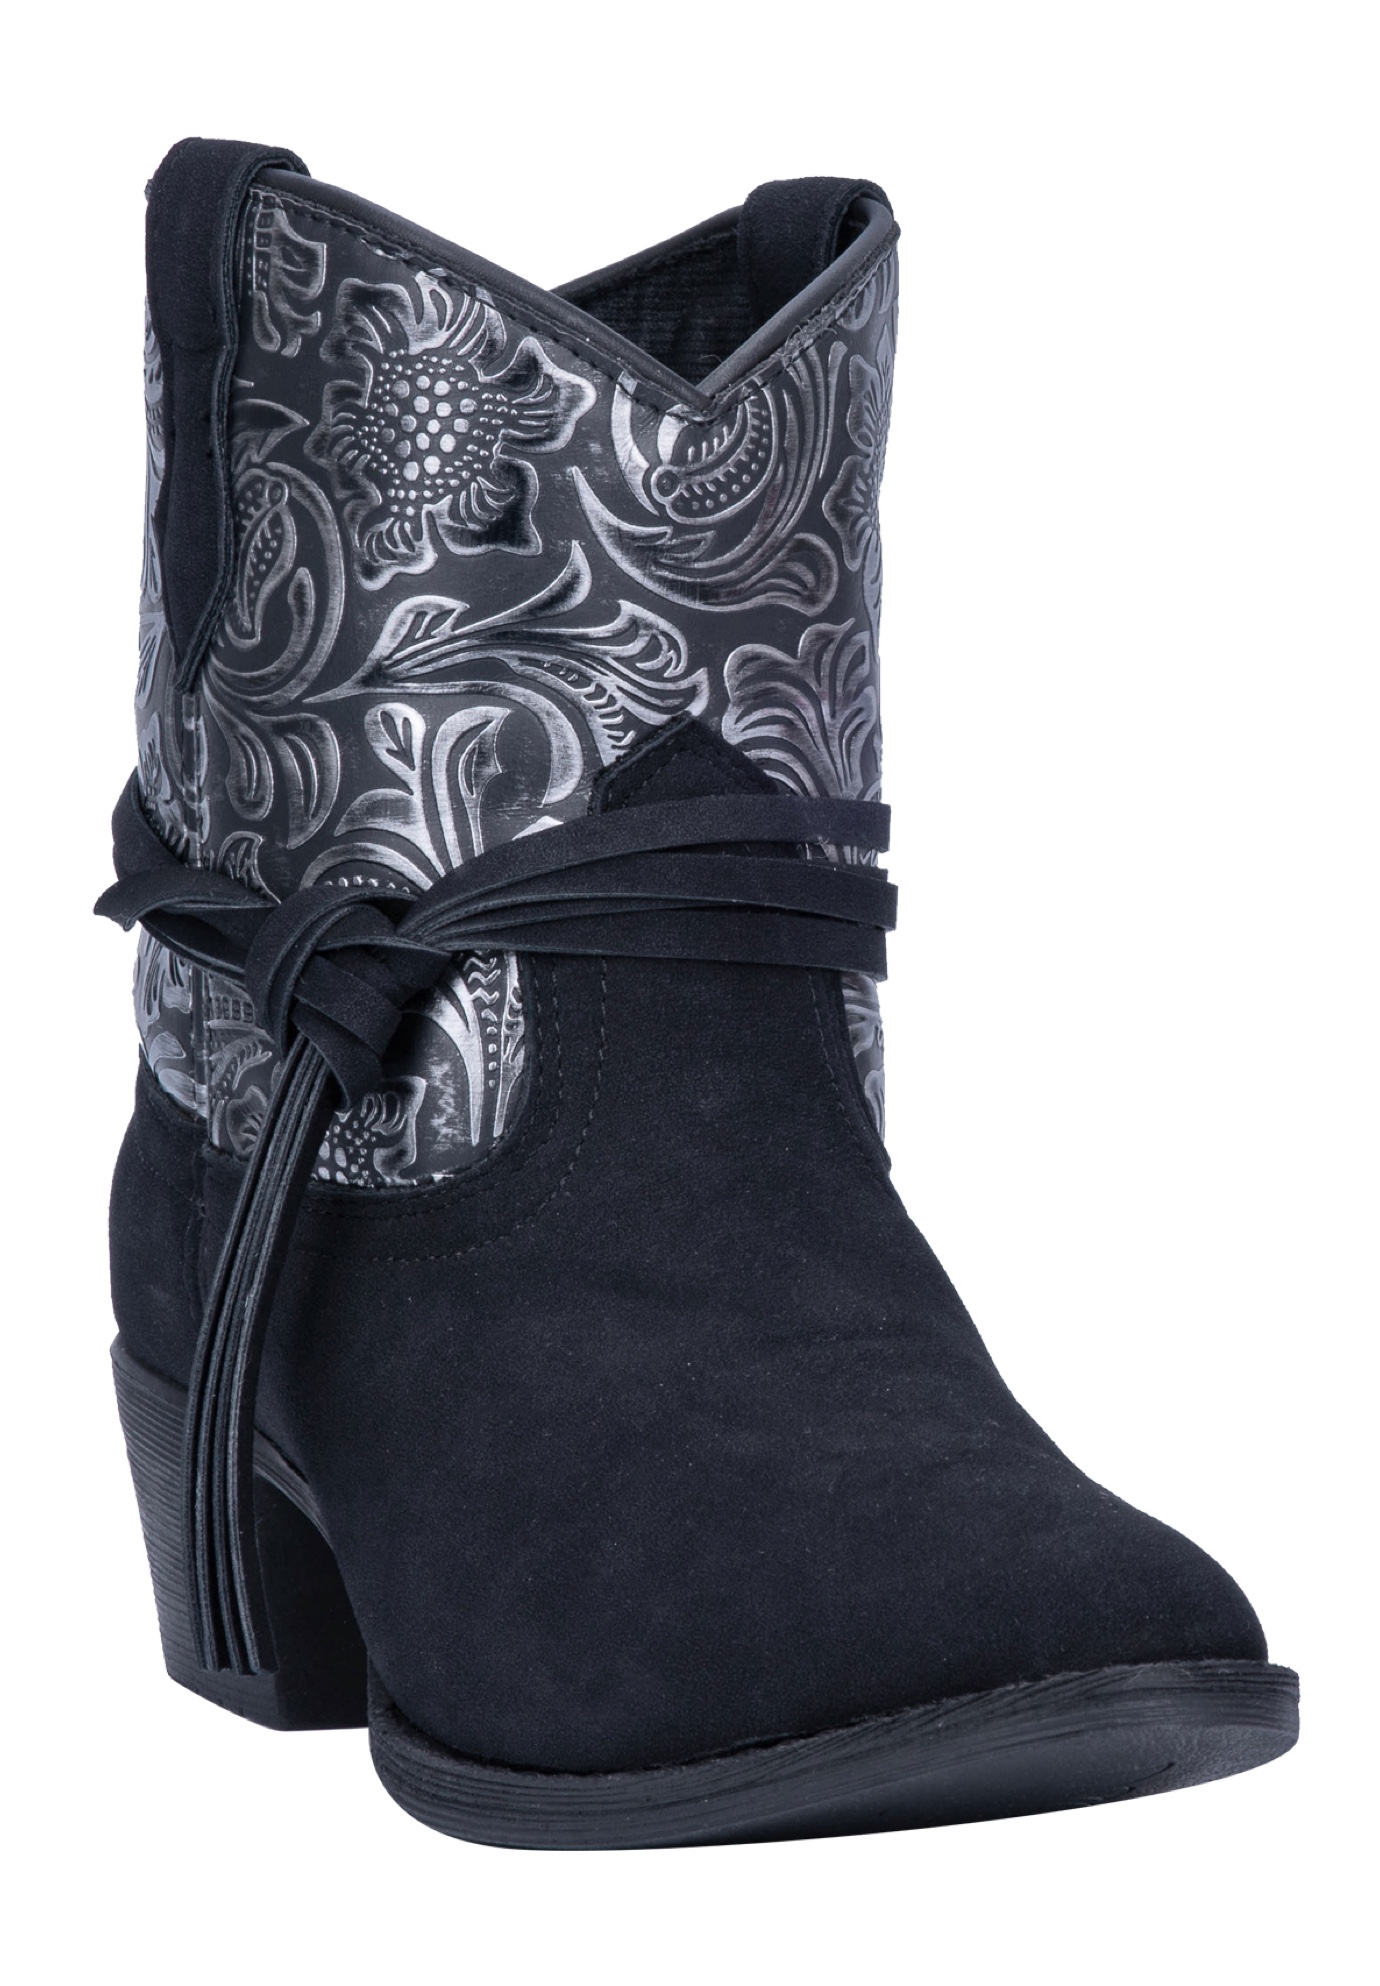 Valerie Boots, 